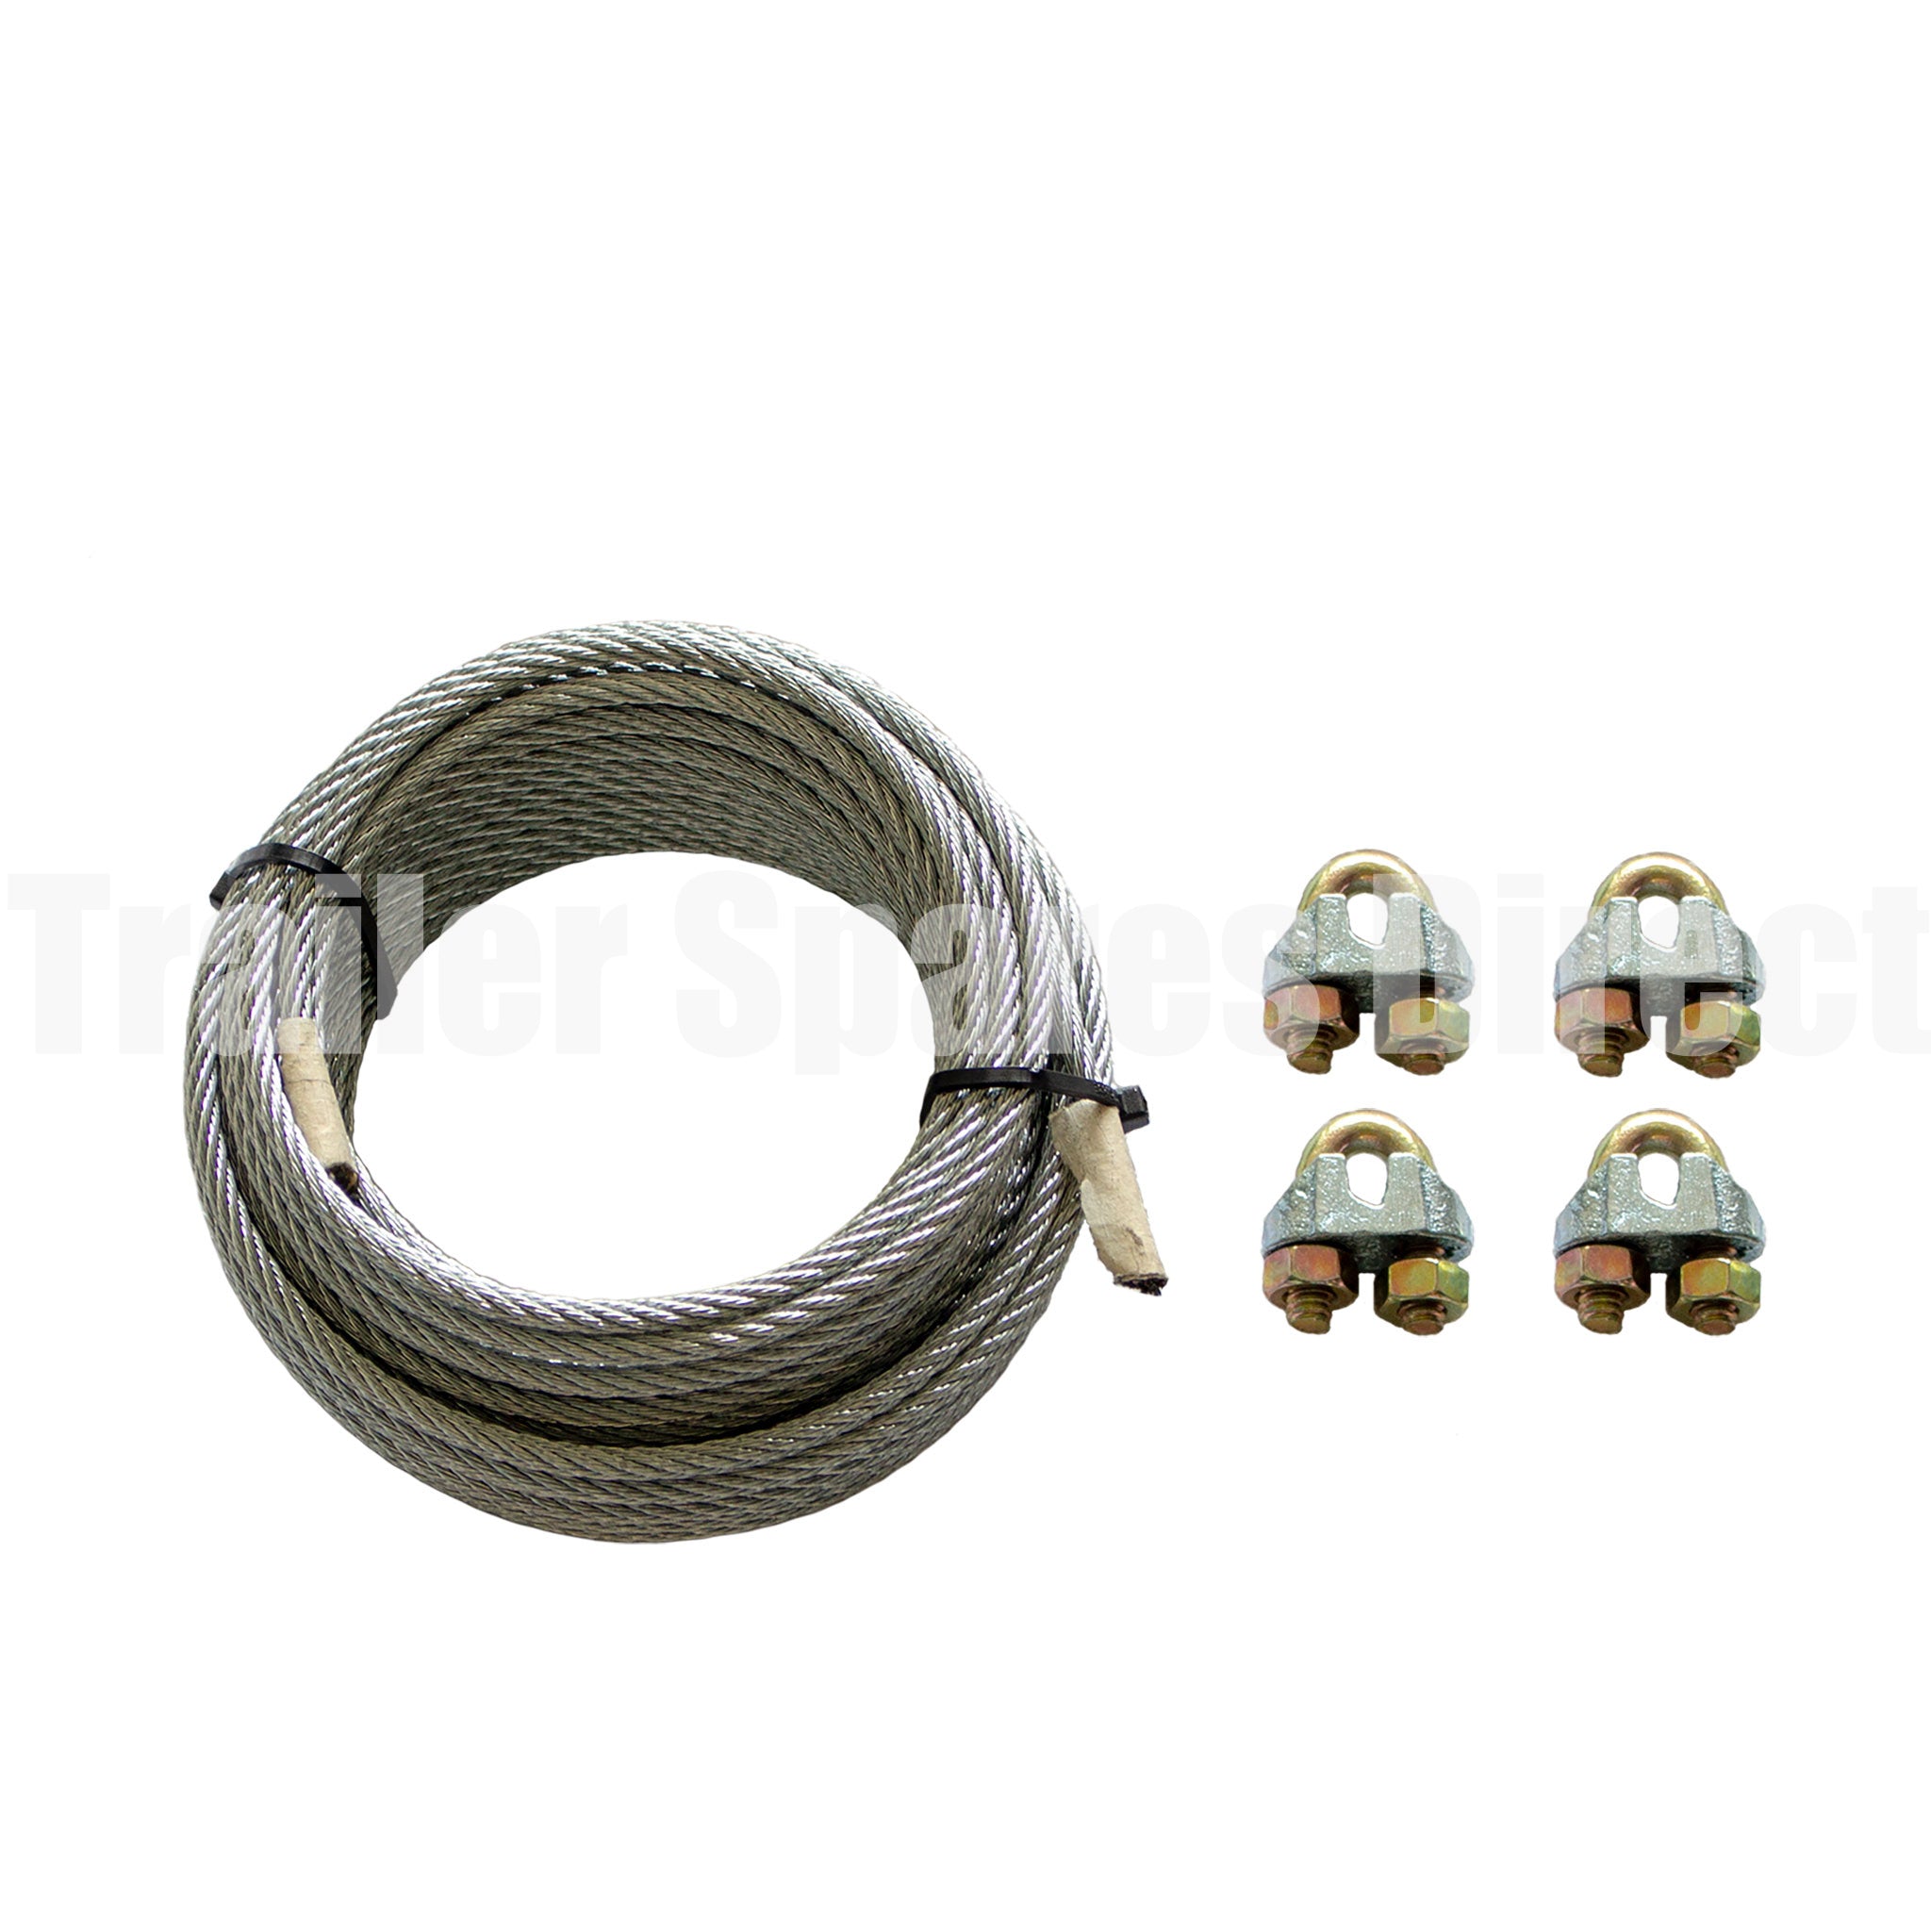 7 metre long brake cable wire kit with clamps